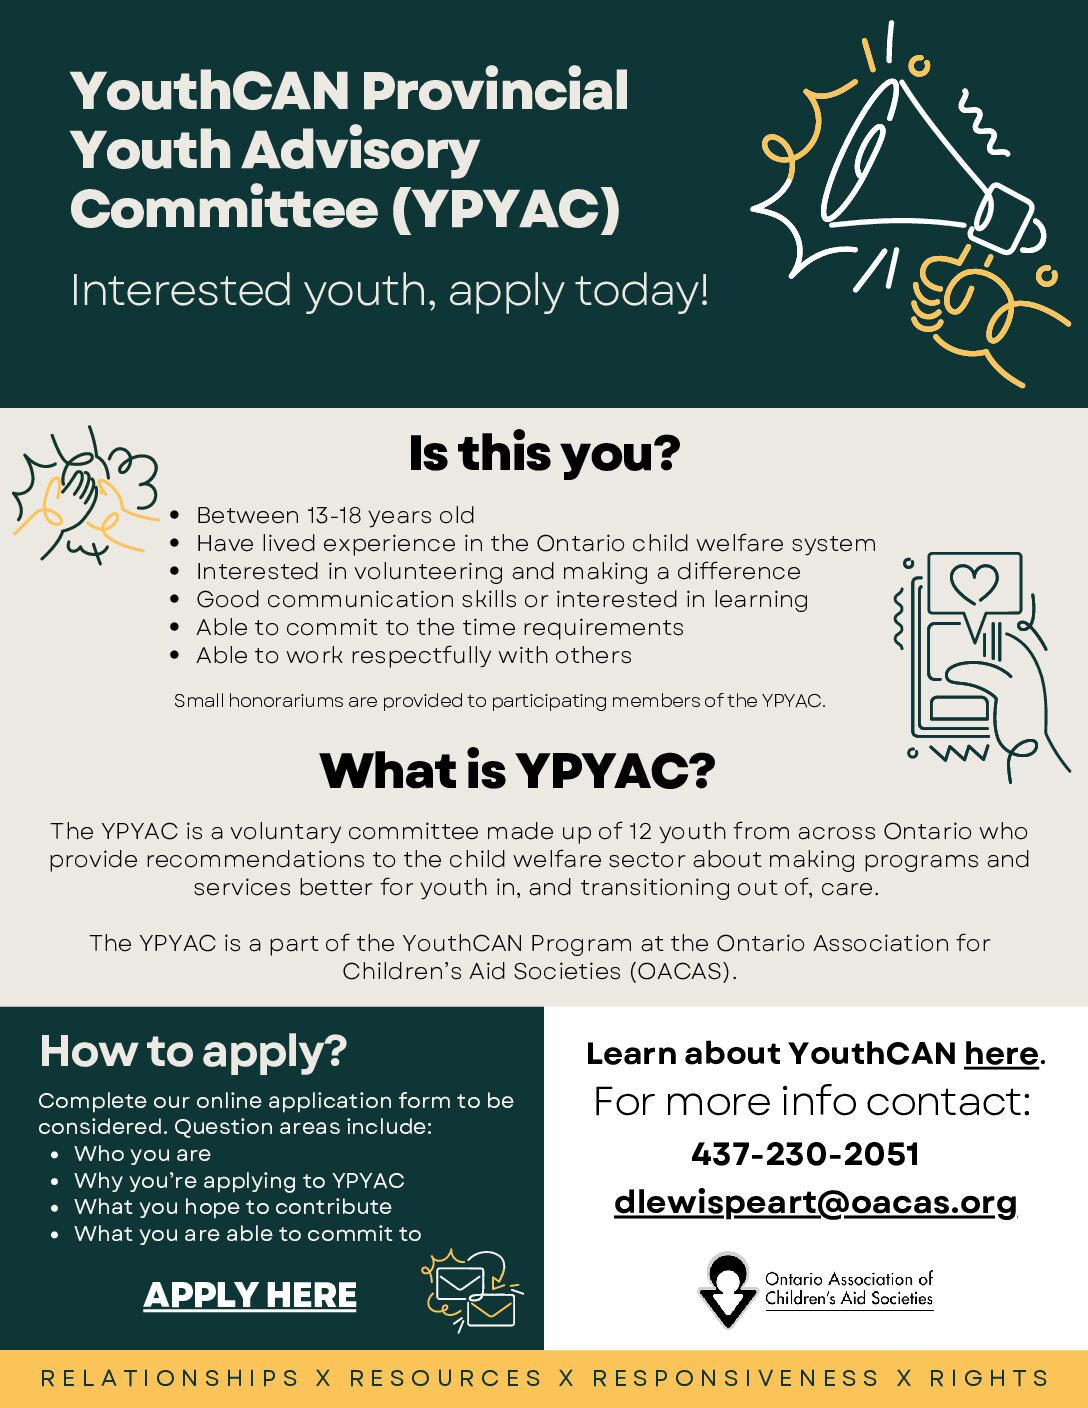 Recruitment open for YouthCAN Provincial Youth Advisory Committee (YPYAC) at OACAS